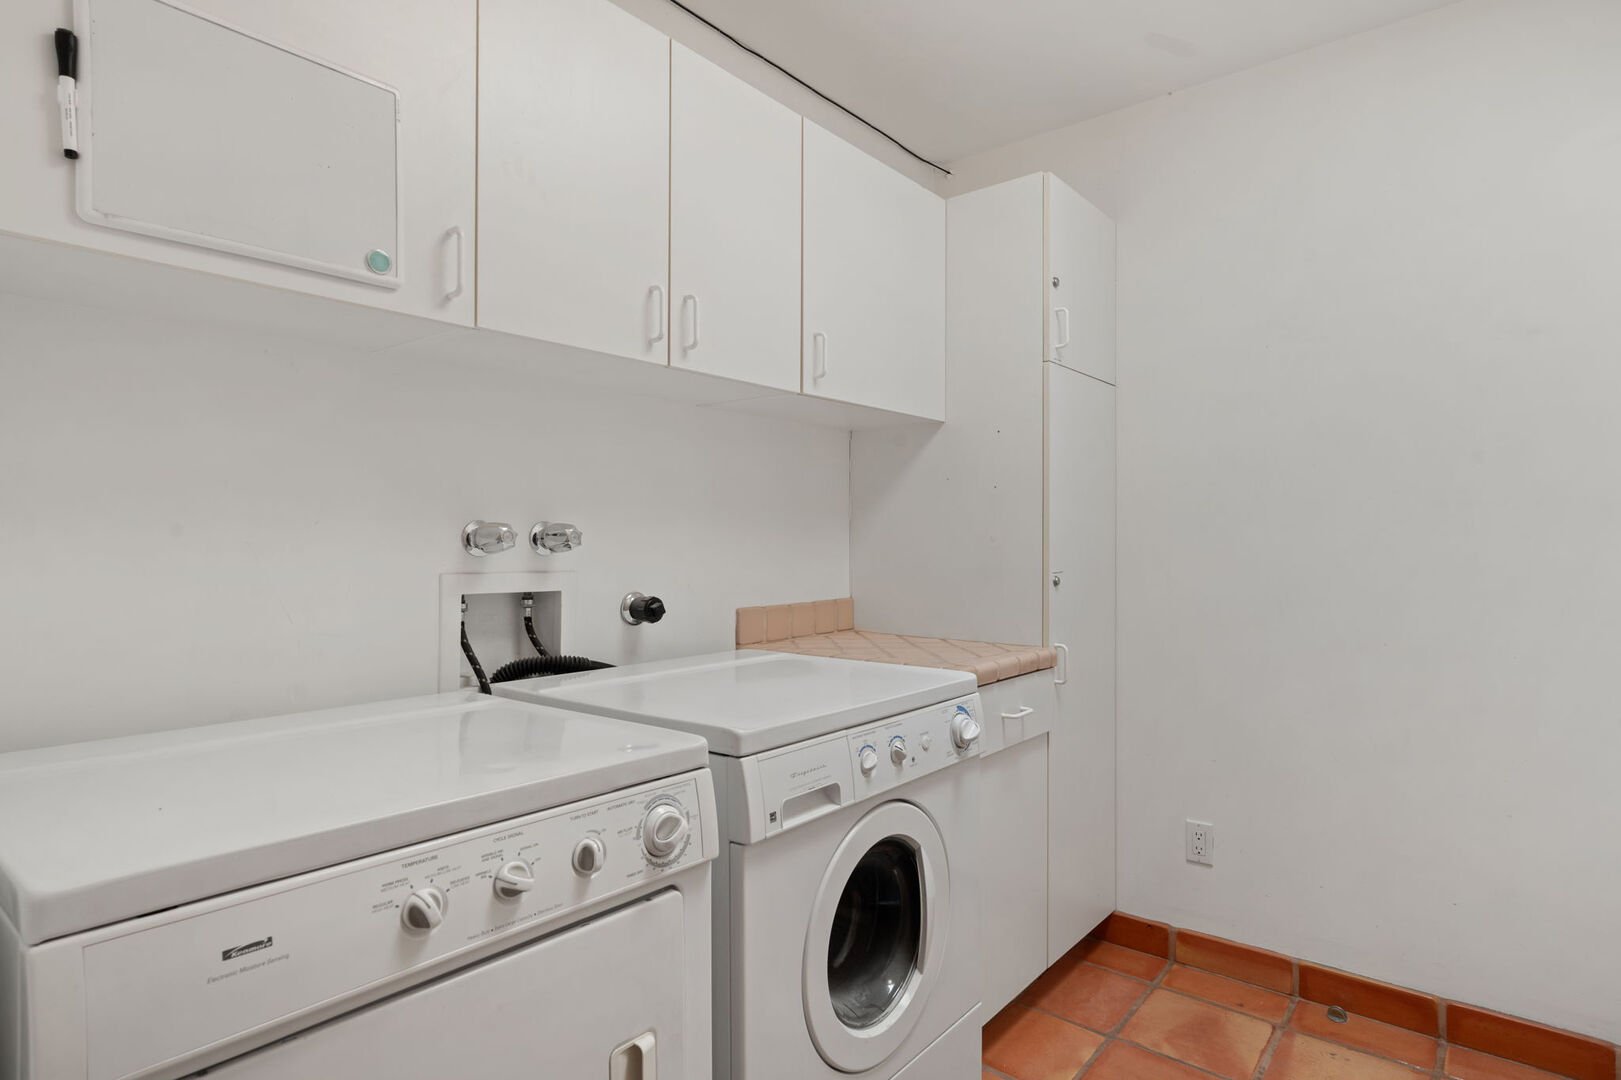 The laundry room is equipped with a washer and dryer, as well as ample cabinets for storing all your laundry essentials.